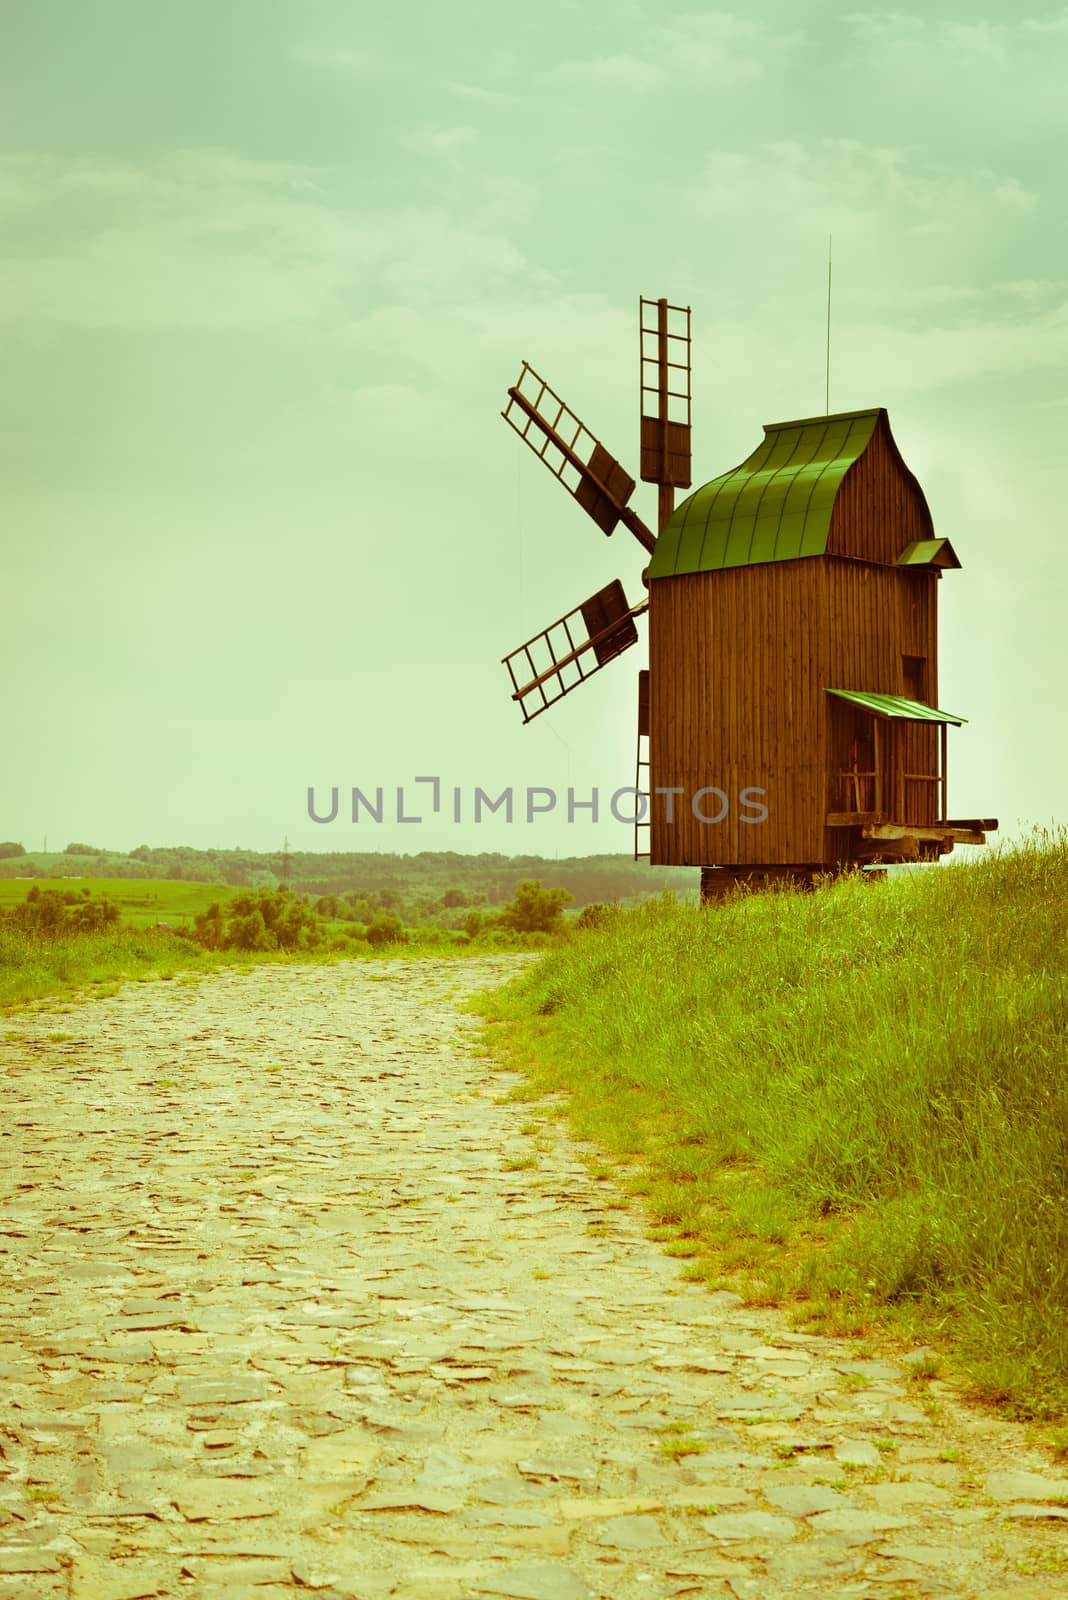 Vintage wooden windmill on stone road under blue sky